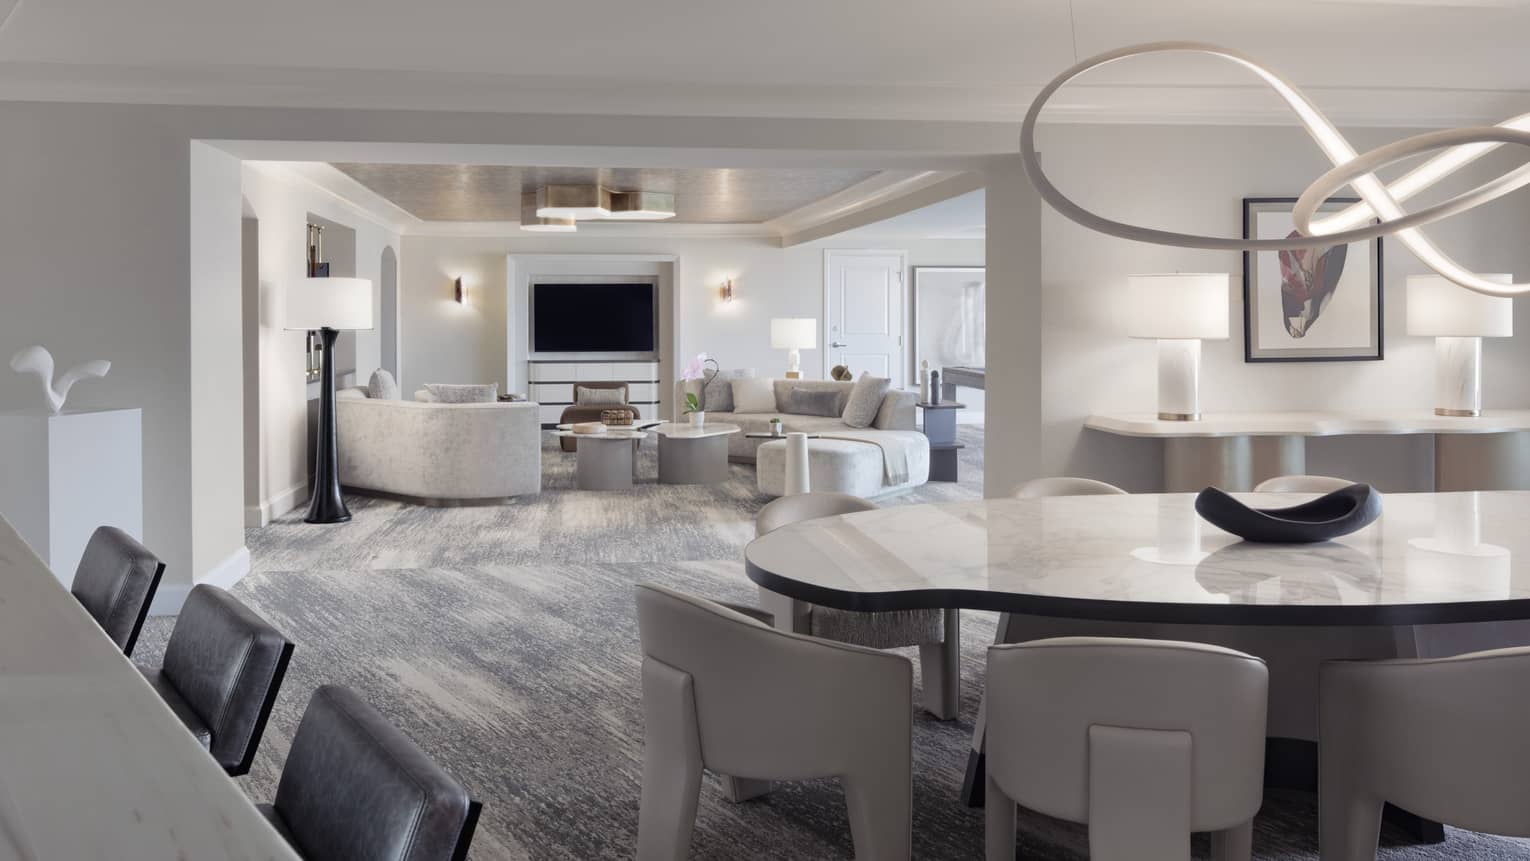 Large living room and dining area of penthouse luxury suite at Four Seasons Hotel Las Vegas